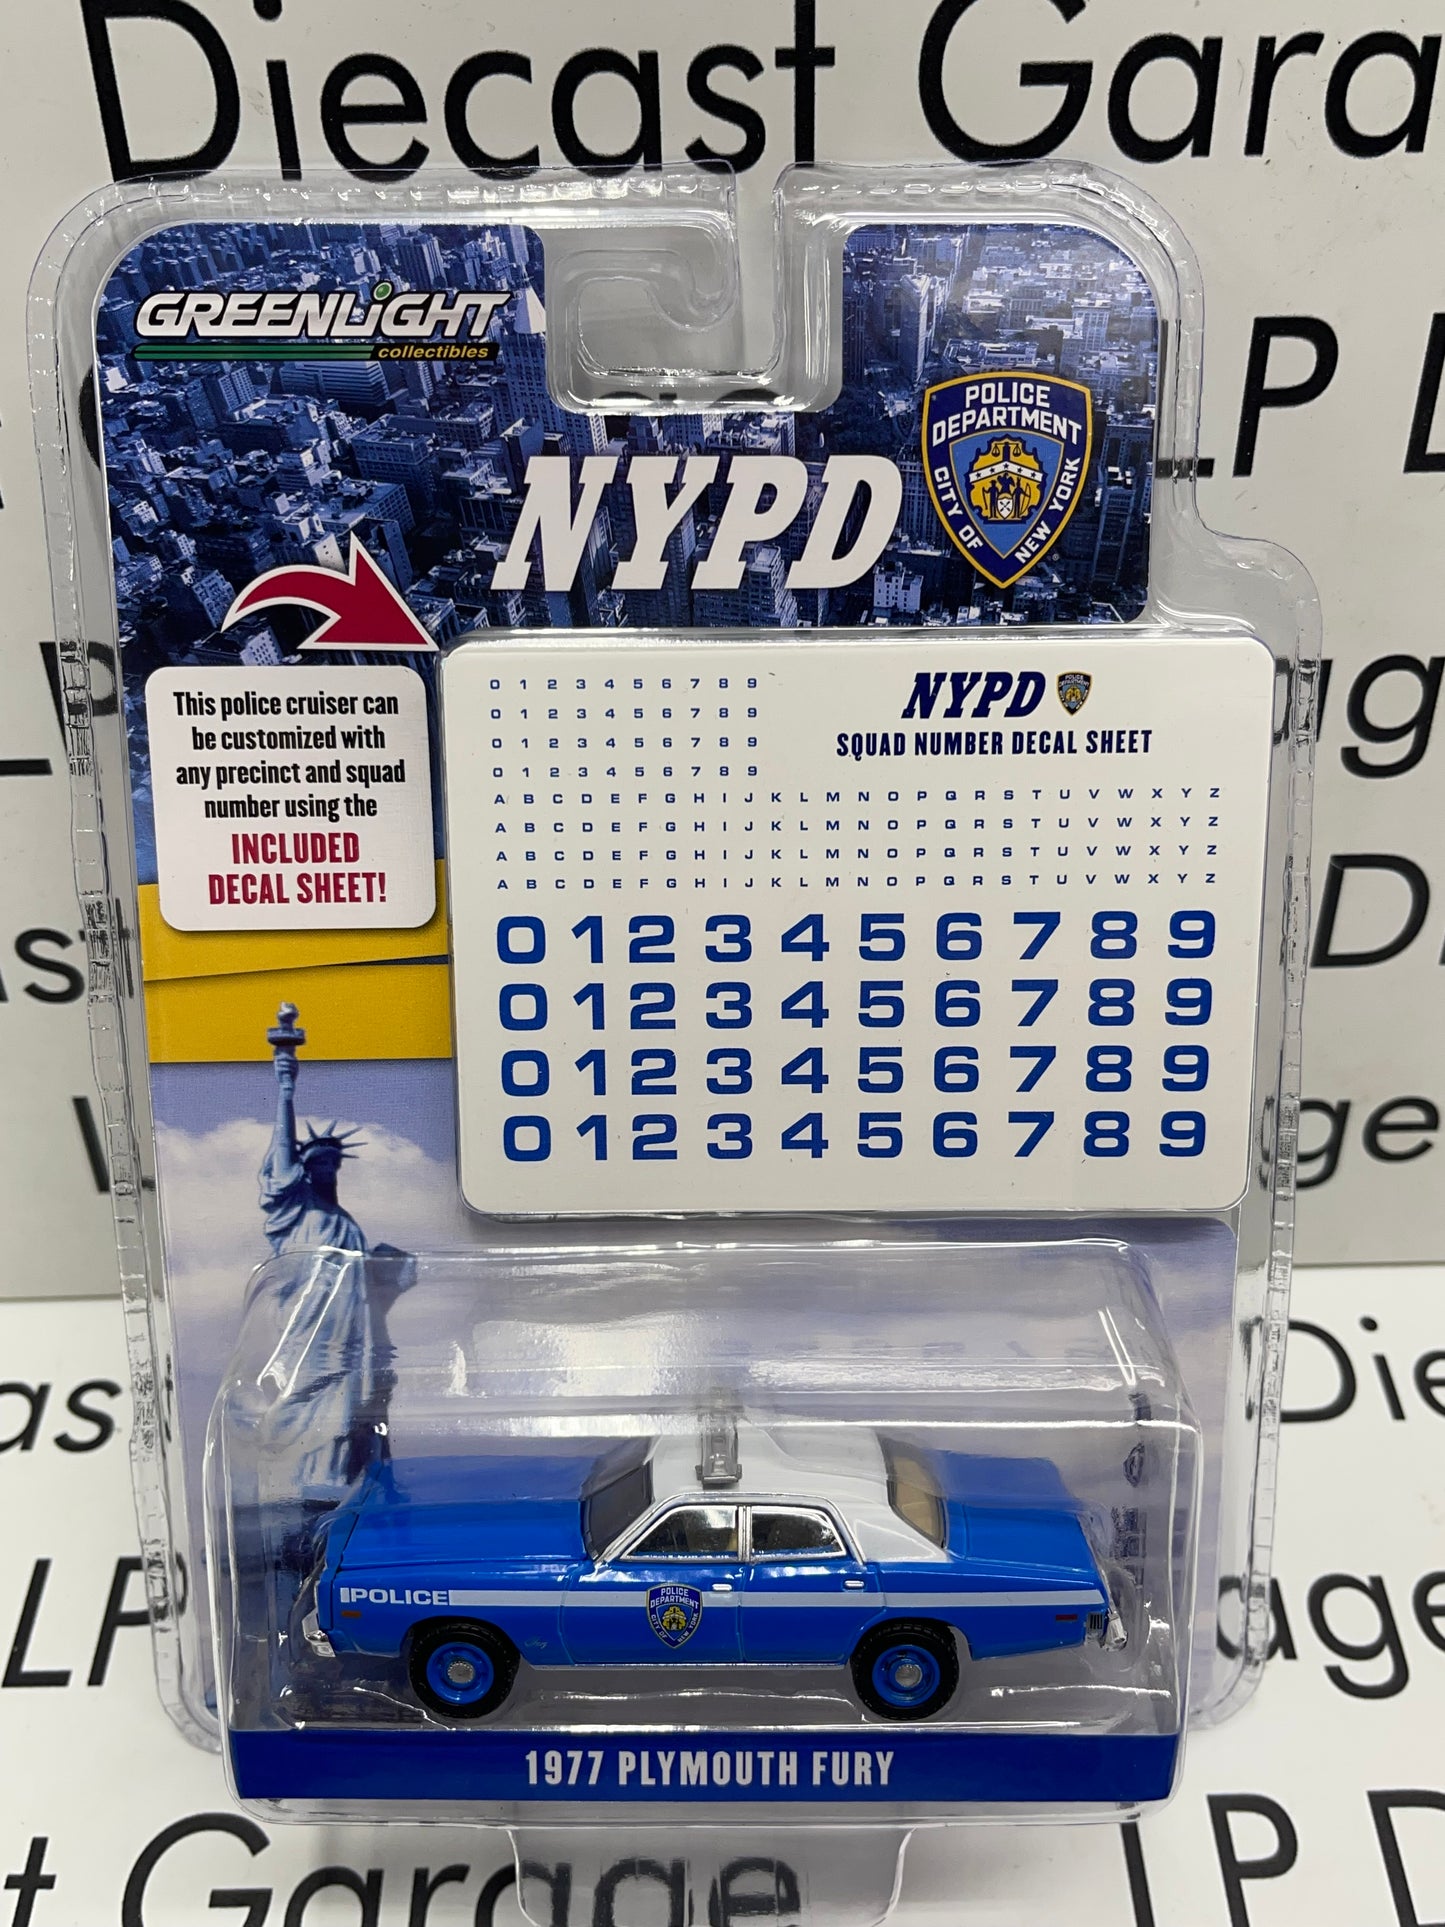 GREENLIGHT 1977 Plymouth Fury NYPD Police w/ Decal Sheet 1:64 Diecast